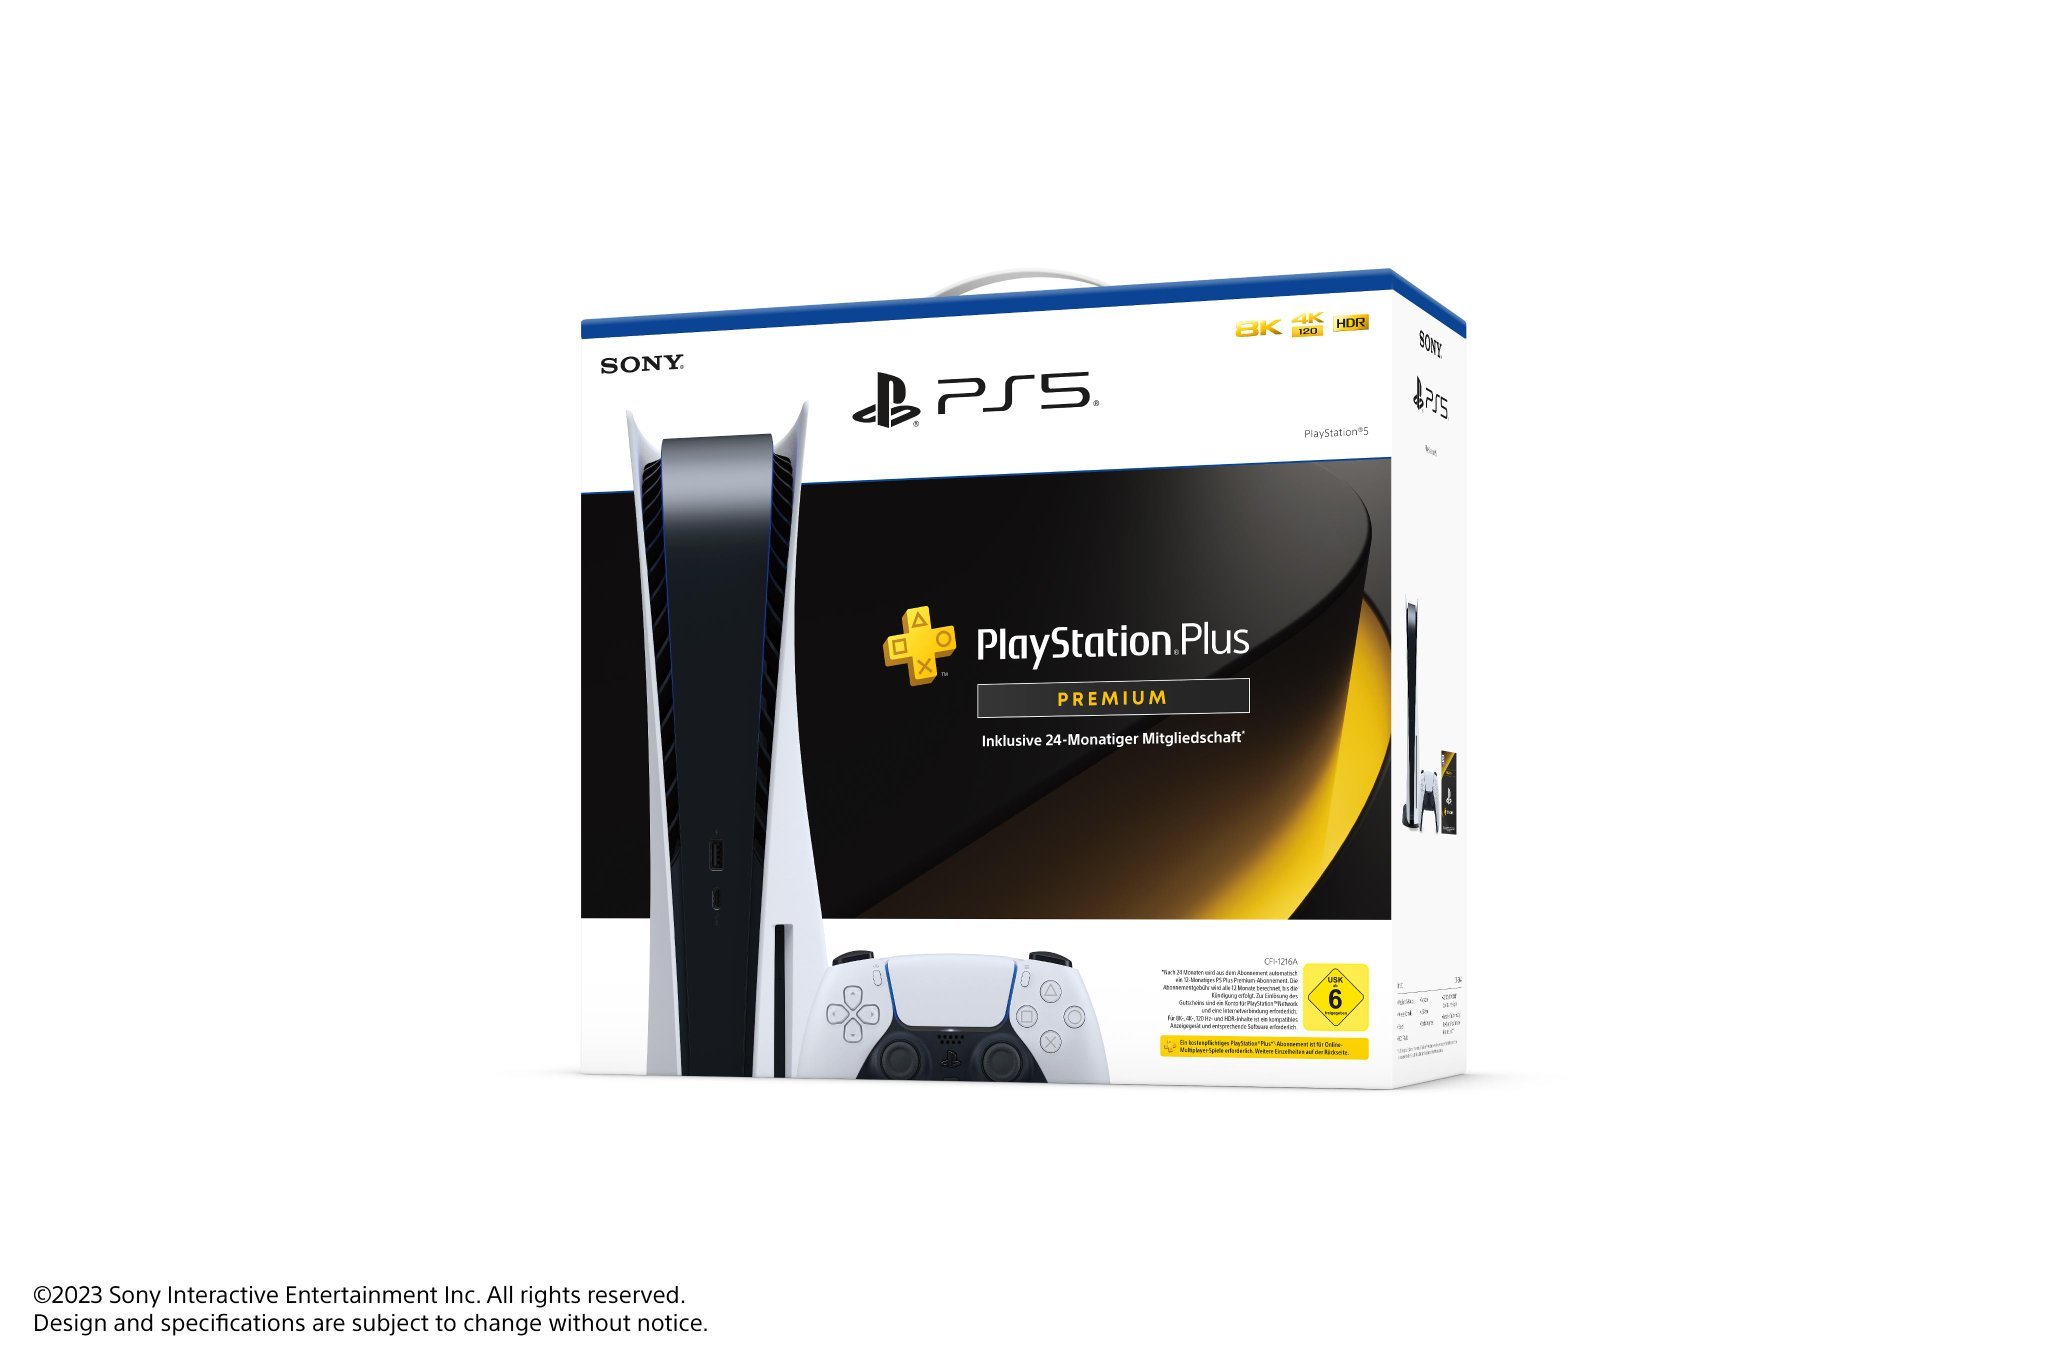 Zuby_Tech on X: New PlayStation 5 Promotion In Portugal Between 1st-15th  July €449.99! #PS5 #PlayStation5 #PlayStation #PlayHasNoLimits   / X